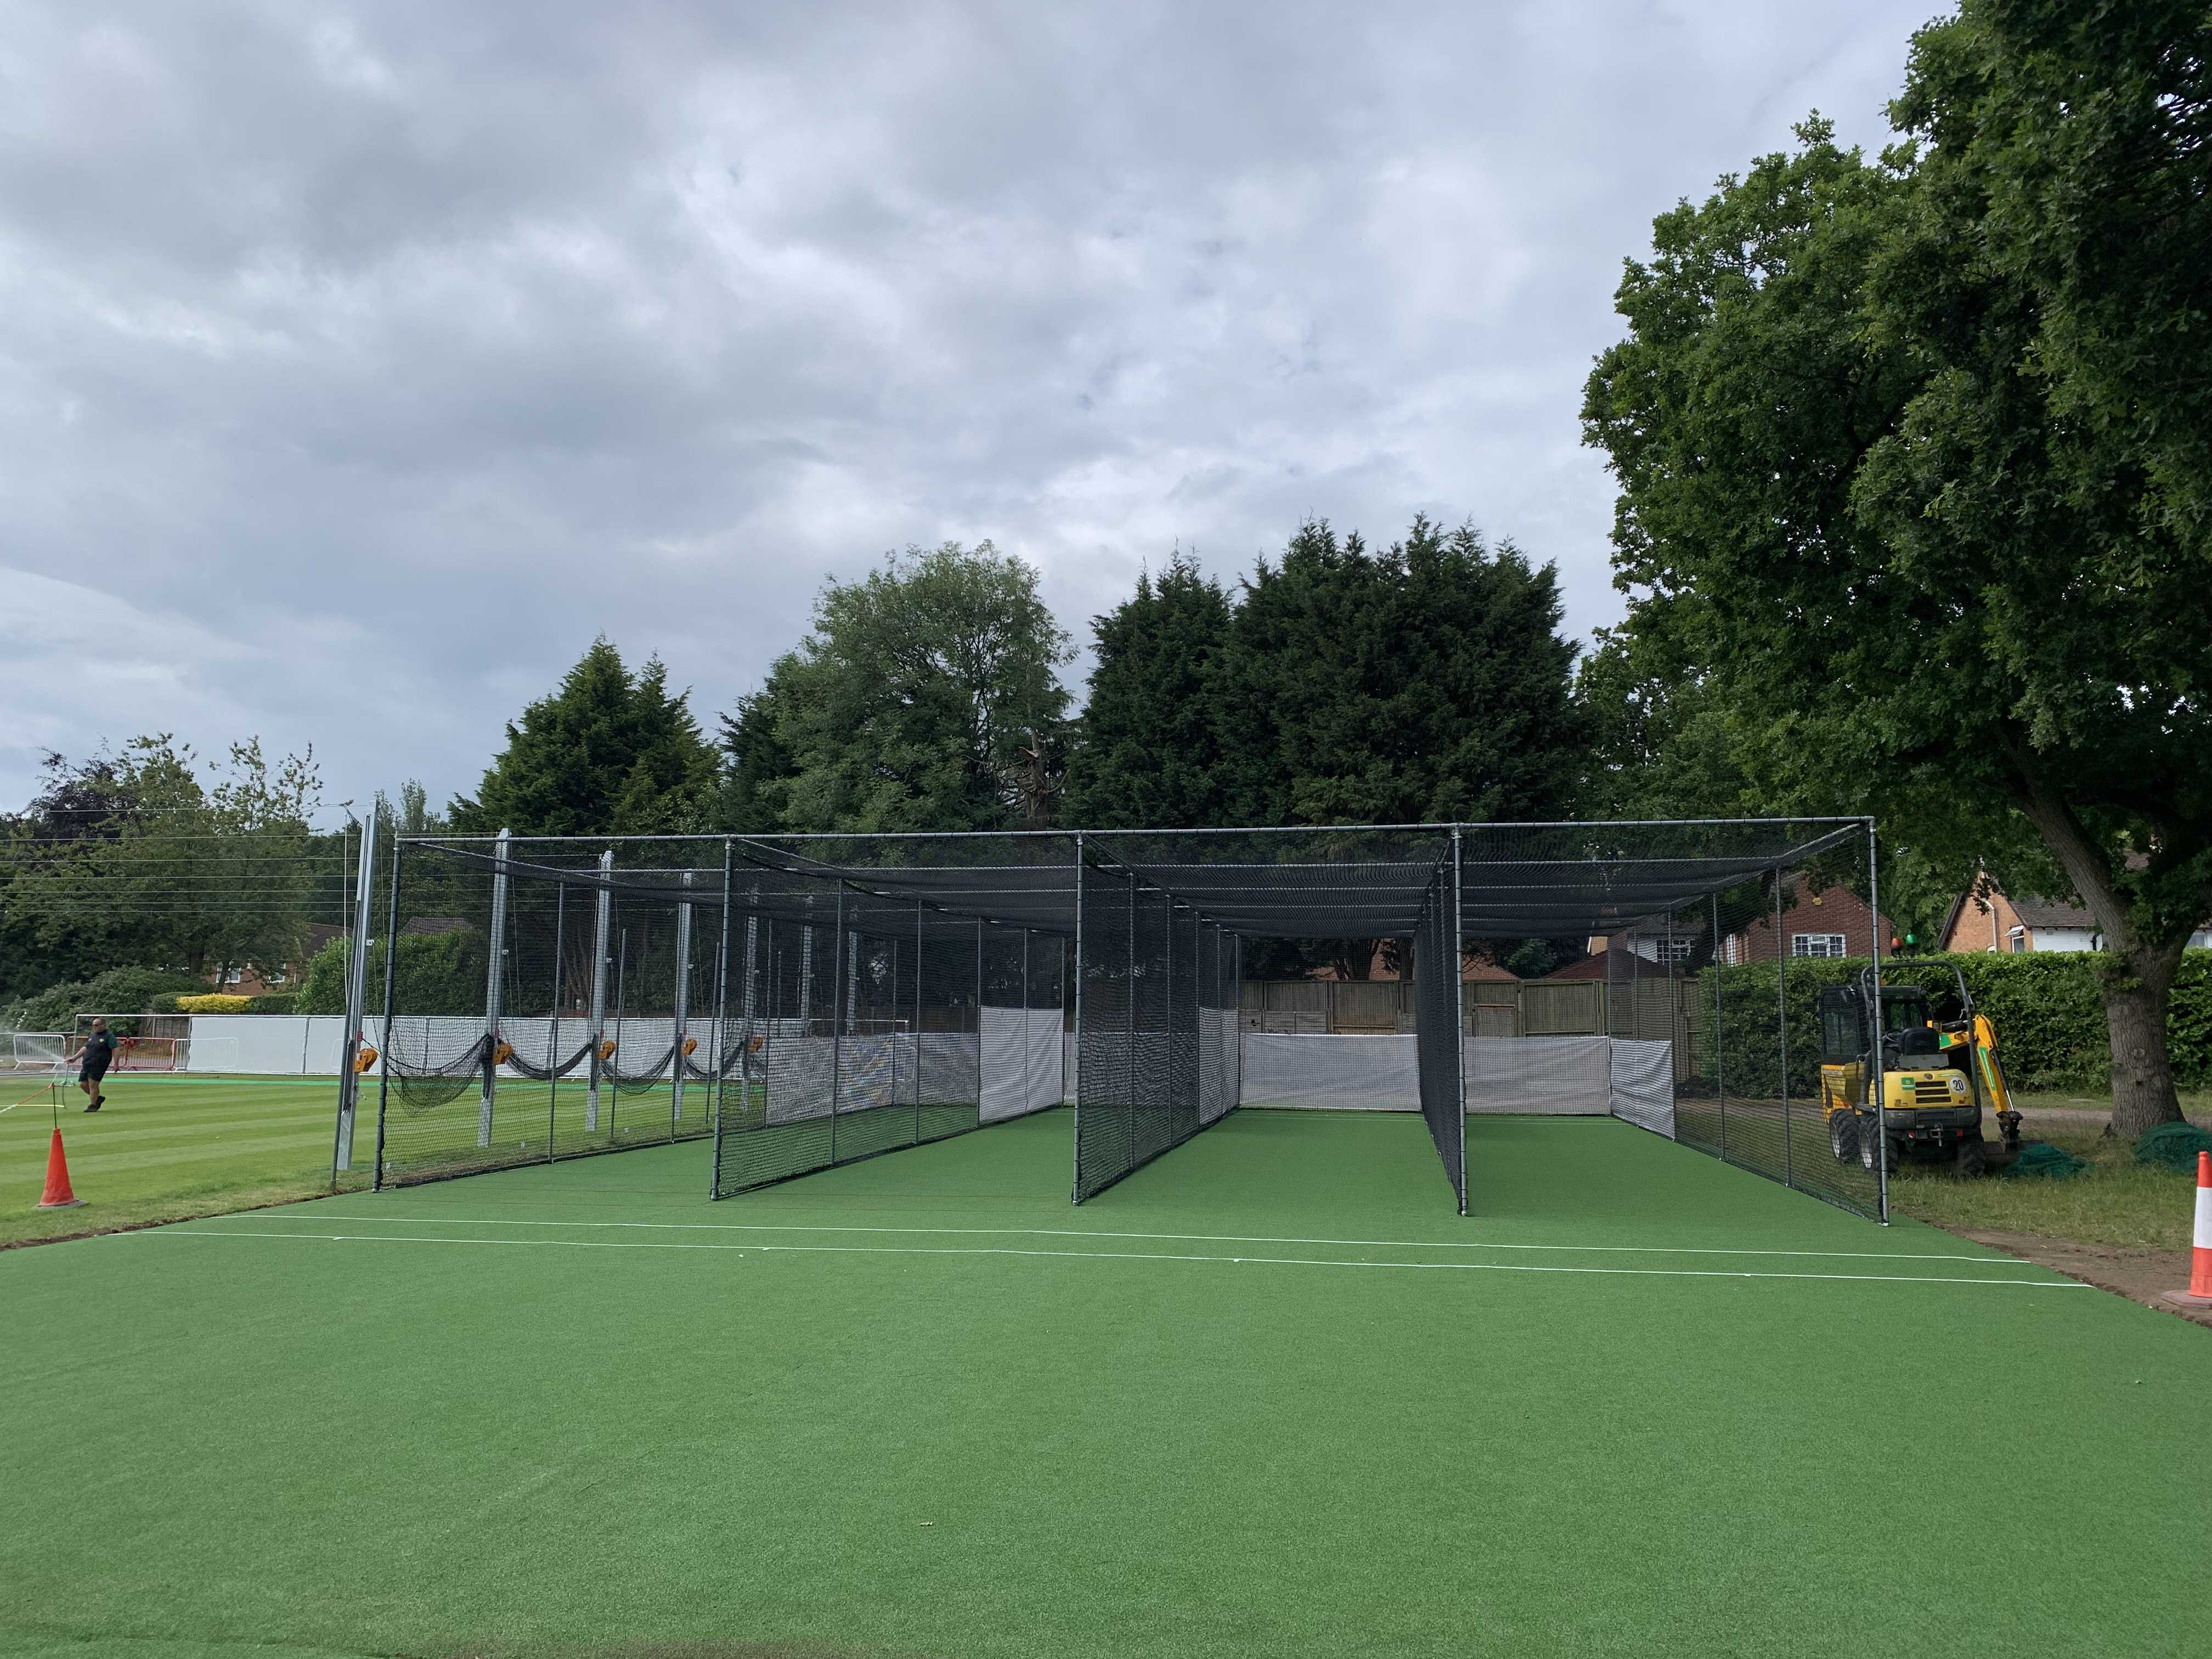 Image shows a four-bay non turf cricket net with black netting and green surfacing